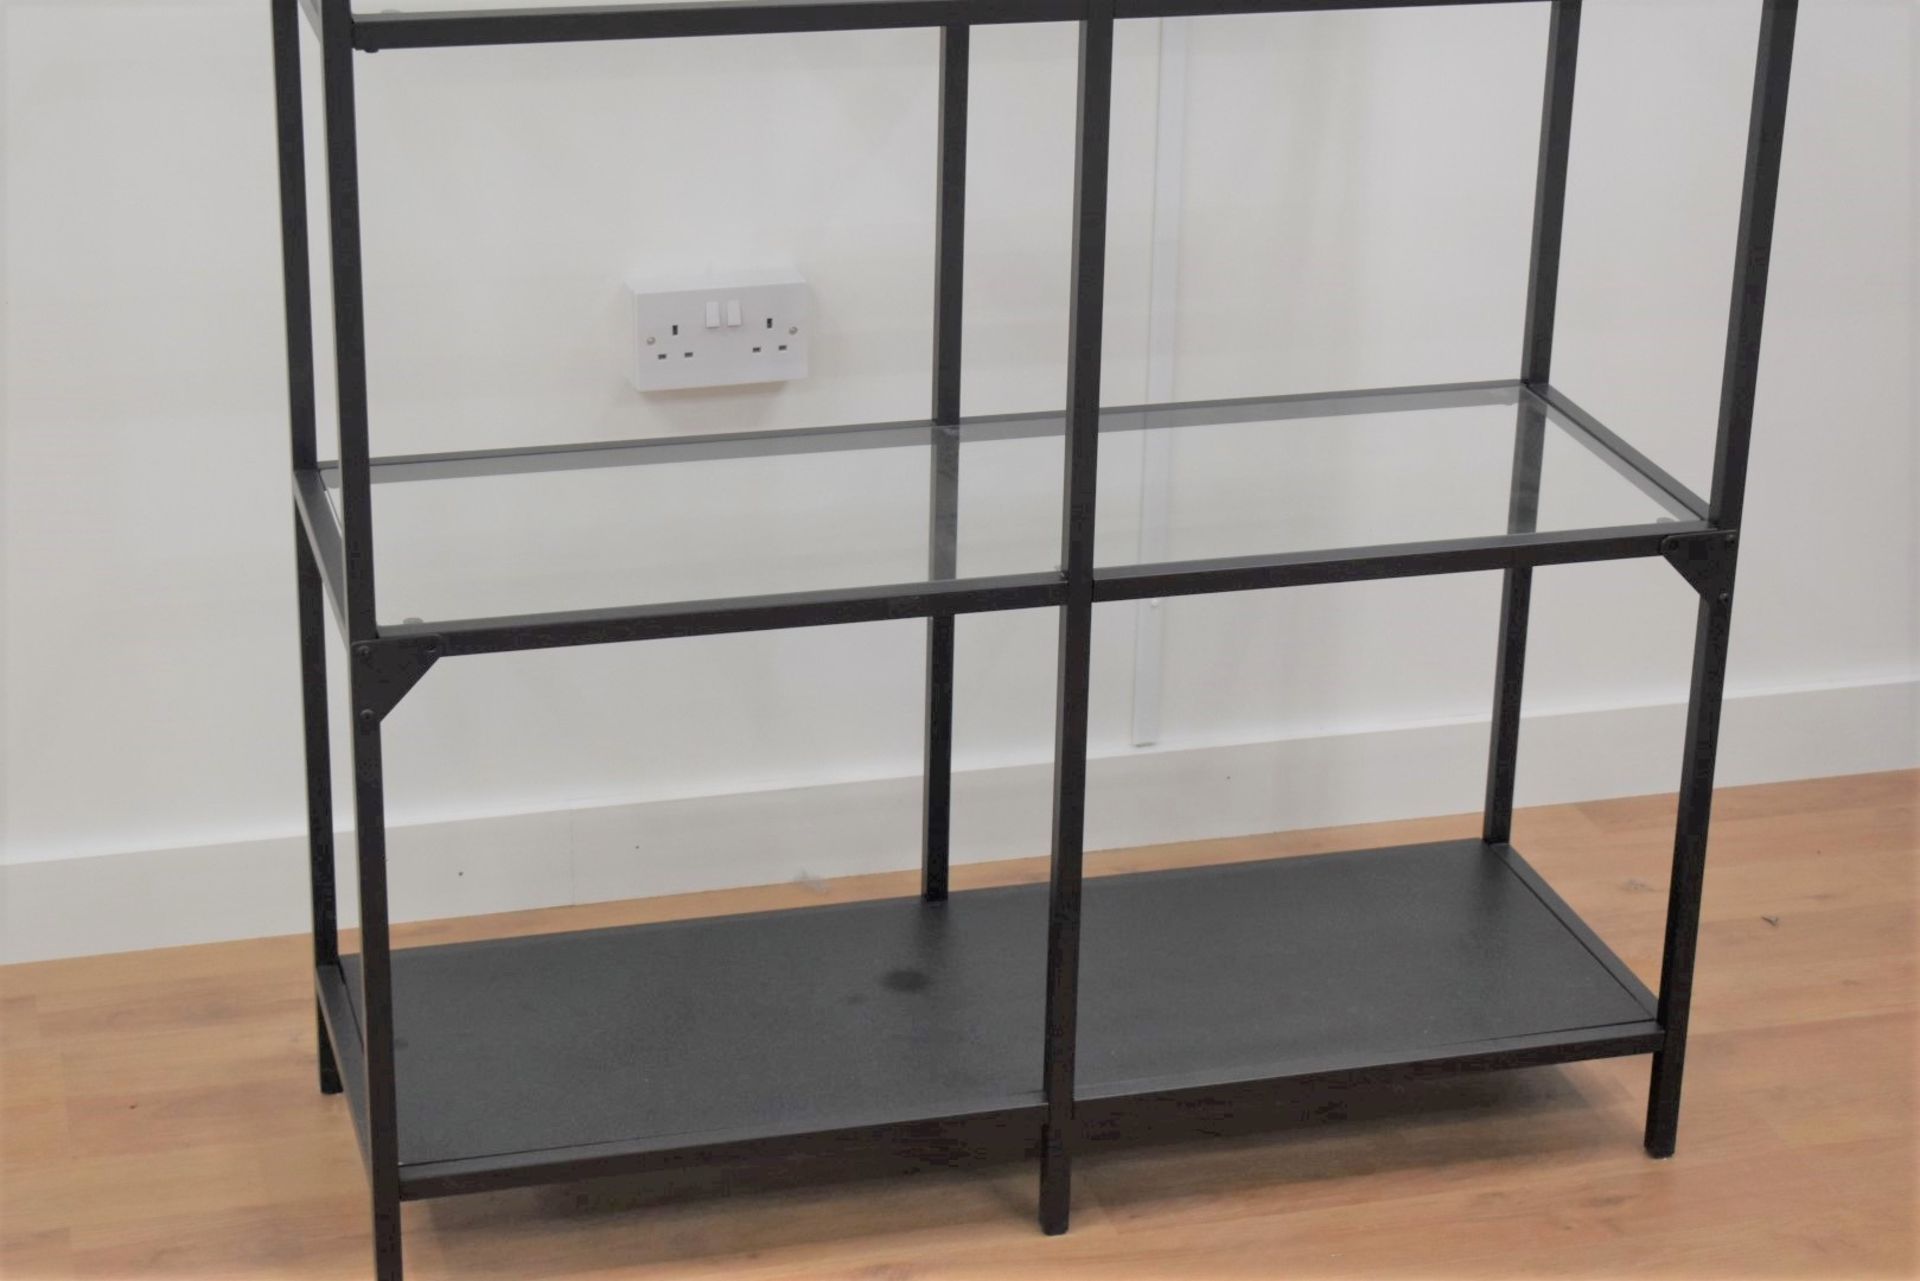 1 x Upright Modern Display Shelving Unit With Metal Frame and Glass Shelves - Image 2 of 5